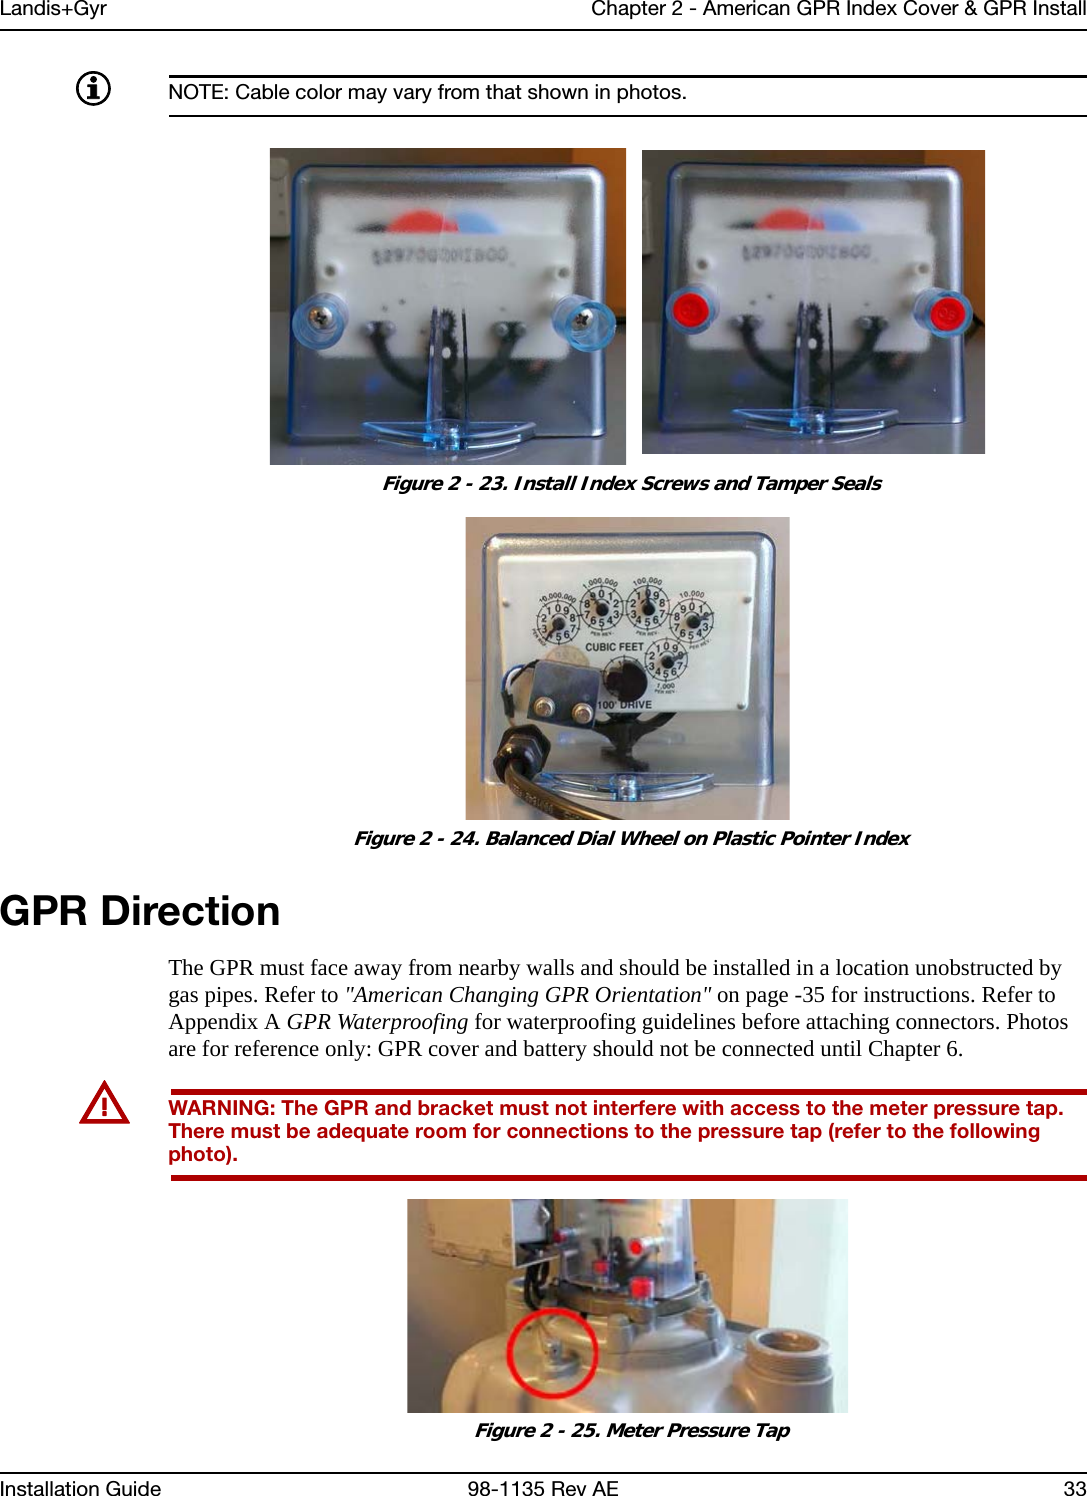 Landis+Gyr Chapter 2 - American GPR Index Cover &amp; GPR InstallInstallation Guide 98-1135 Rev AE 33NOTE: Cable color may vary from that shown in photos. Figure 2 - 23. Install Index Screws and Tamper Seals  Figure 2 - 24. Balanced Dial Wheel on Plastic Pointer IndexGPR DirectionThe GPR must face away from nearby walls and should be installed in a location unobstructed by gas pipes. Refer to &quot;American Changing GPR Orientation&quot; on page -35 for instructions. Refer to Appendix A GPR Waterproofing for waterproofing guidelines before attaching connectors. Photos are for reference only: GPR cover and battery should not be connected until Chapter 6.UWARNING: The GPR and bracket must not interfere with access to the meter pressure tap. There must be adequate room for connections to the pressure tap (refer to the following photo). Figure 2 - 25. Meter Pressure Tap